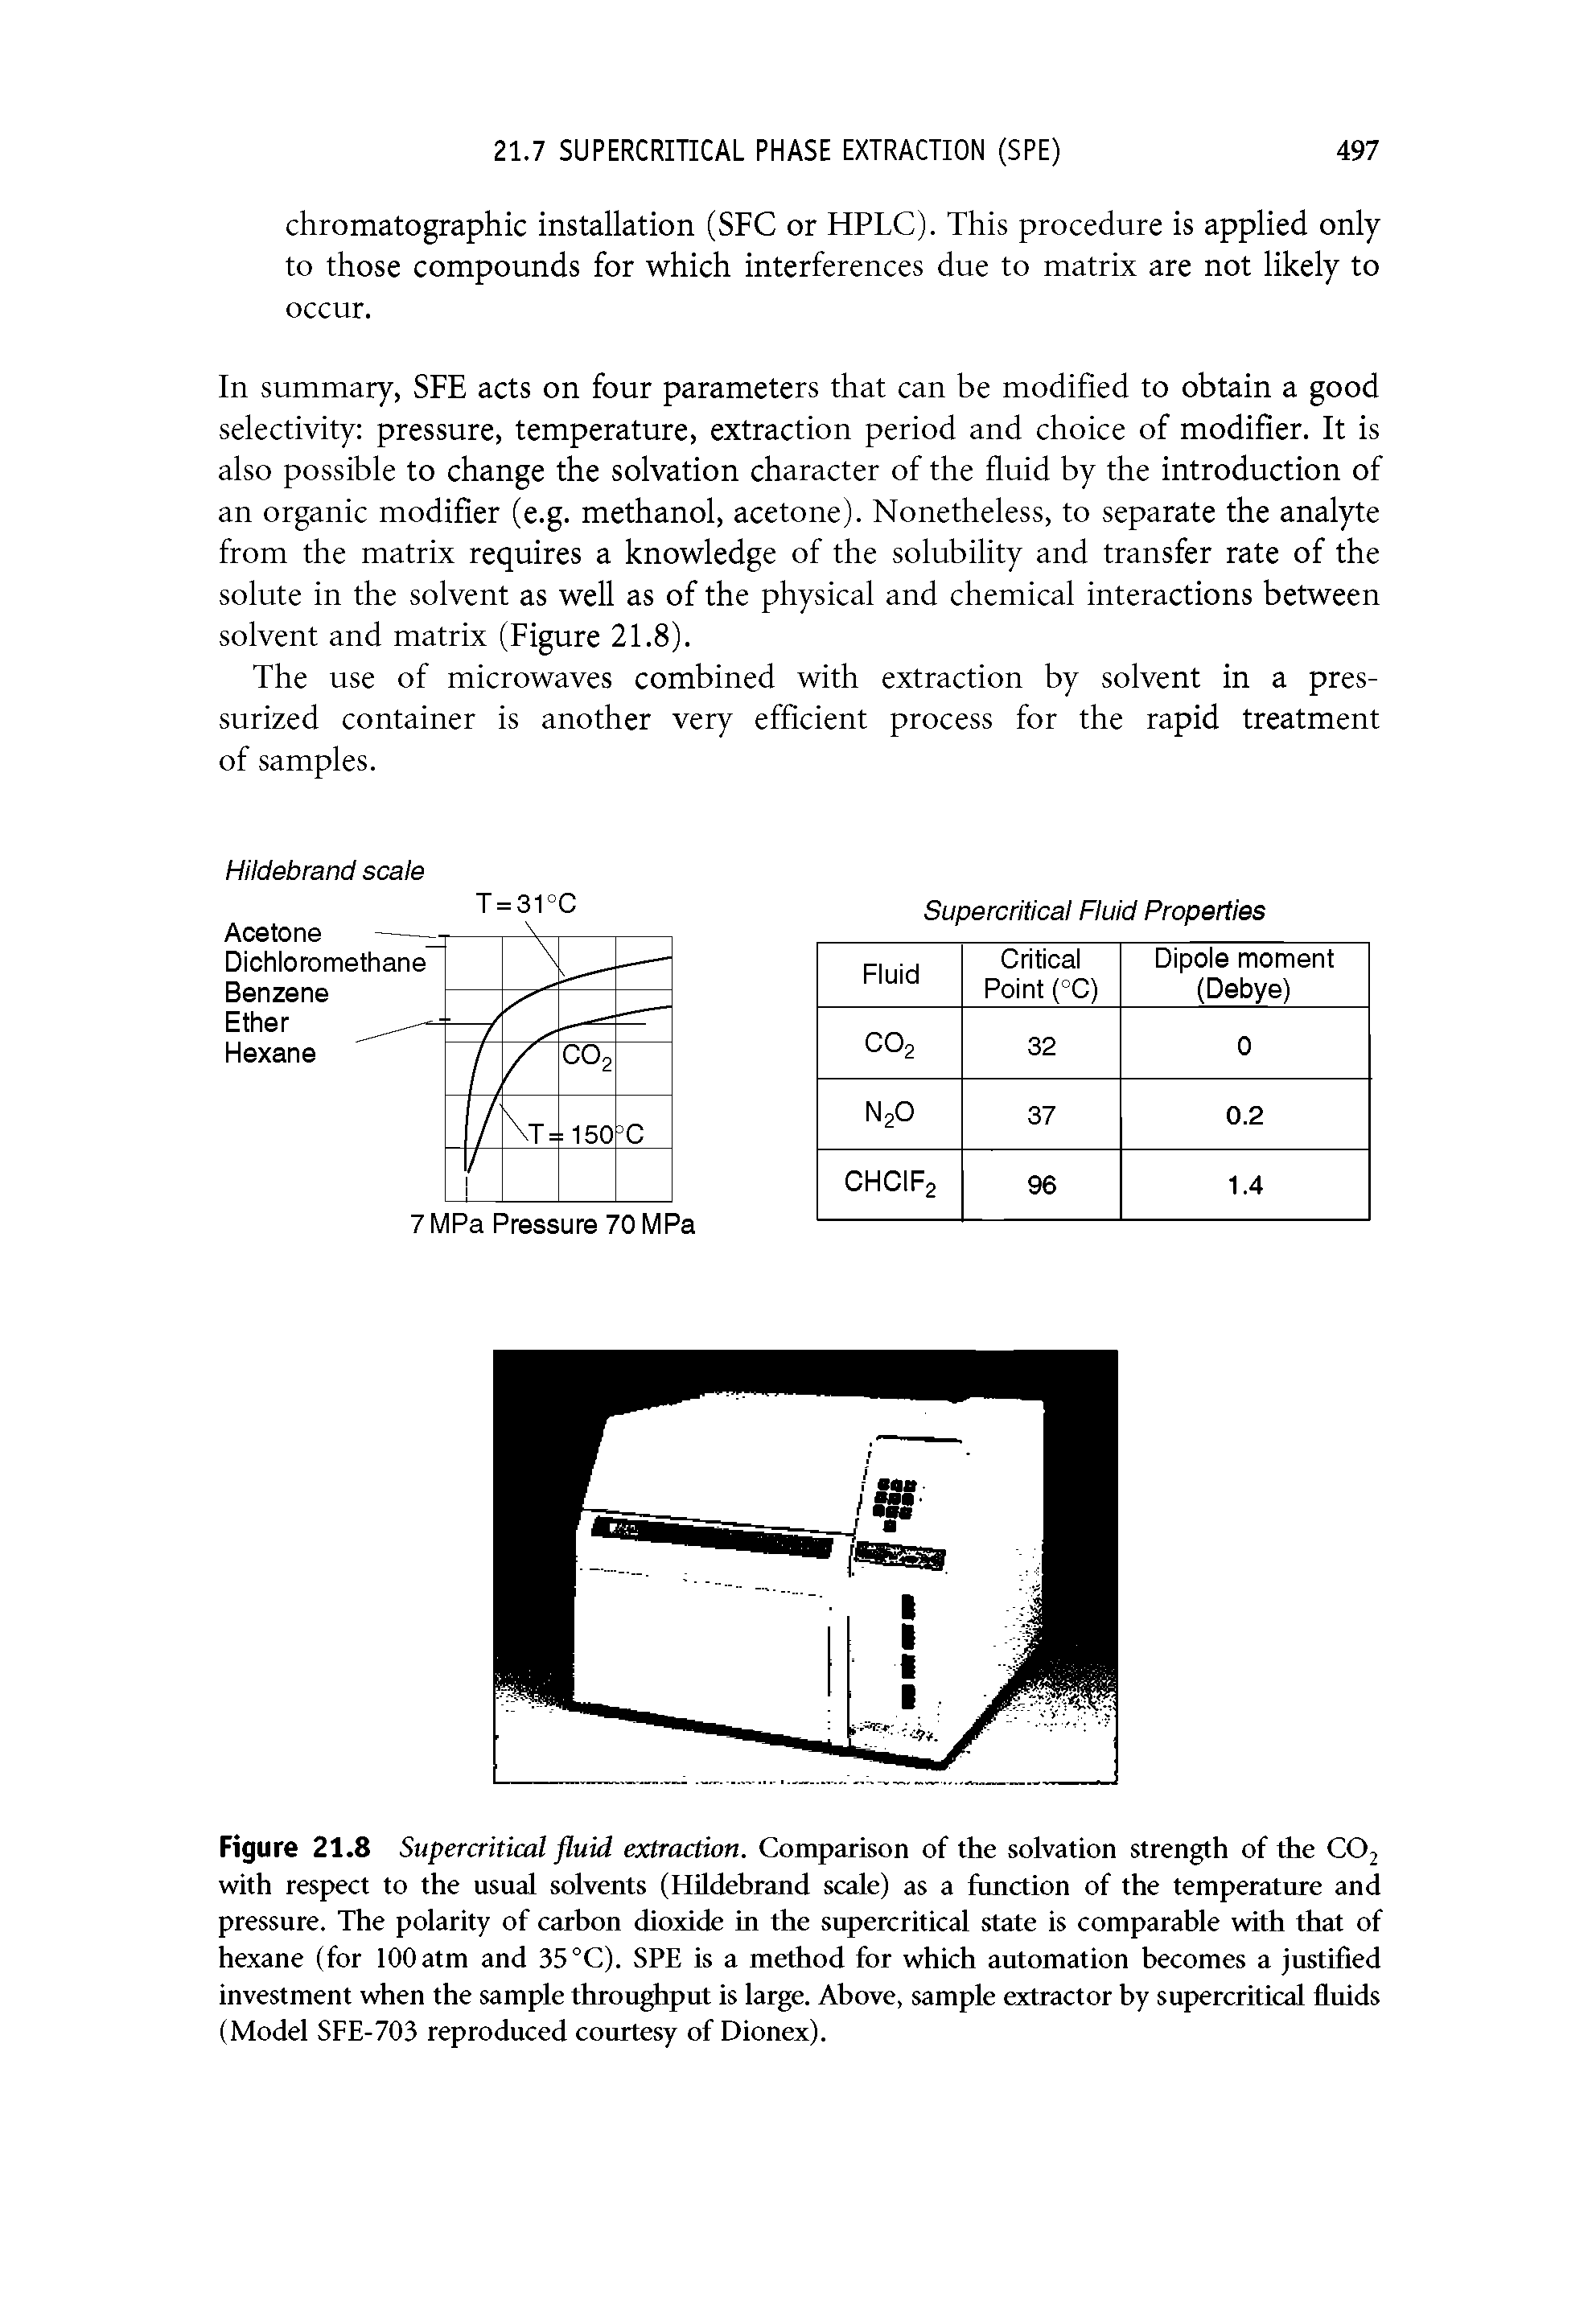 Figure 21.8 Supercritical fluid extraction. Comparison of the solvation strength of the COj with respect to the usual solvents (HUdehrand scale) as a function of the temperature and pressure. The polarity of carhon dioxide in the supercritical state is comparable with that of hexane (for 100 atm and 35 °C). SPE is a method for which automation becomes a justified investment when the sample throughput is large. Above, sample extractor by supercritical fluids (Model SFE-703 reproduced courtesy of Dionex).